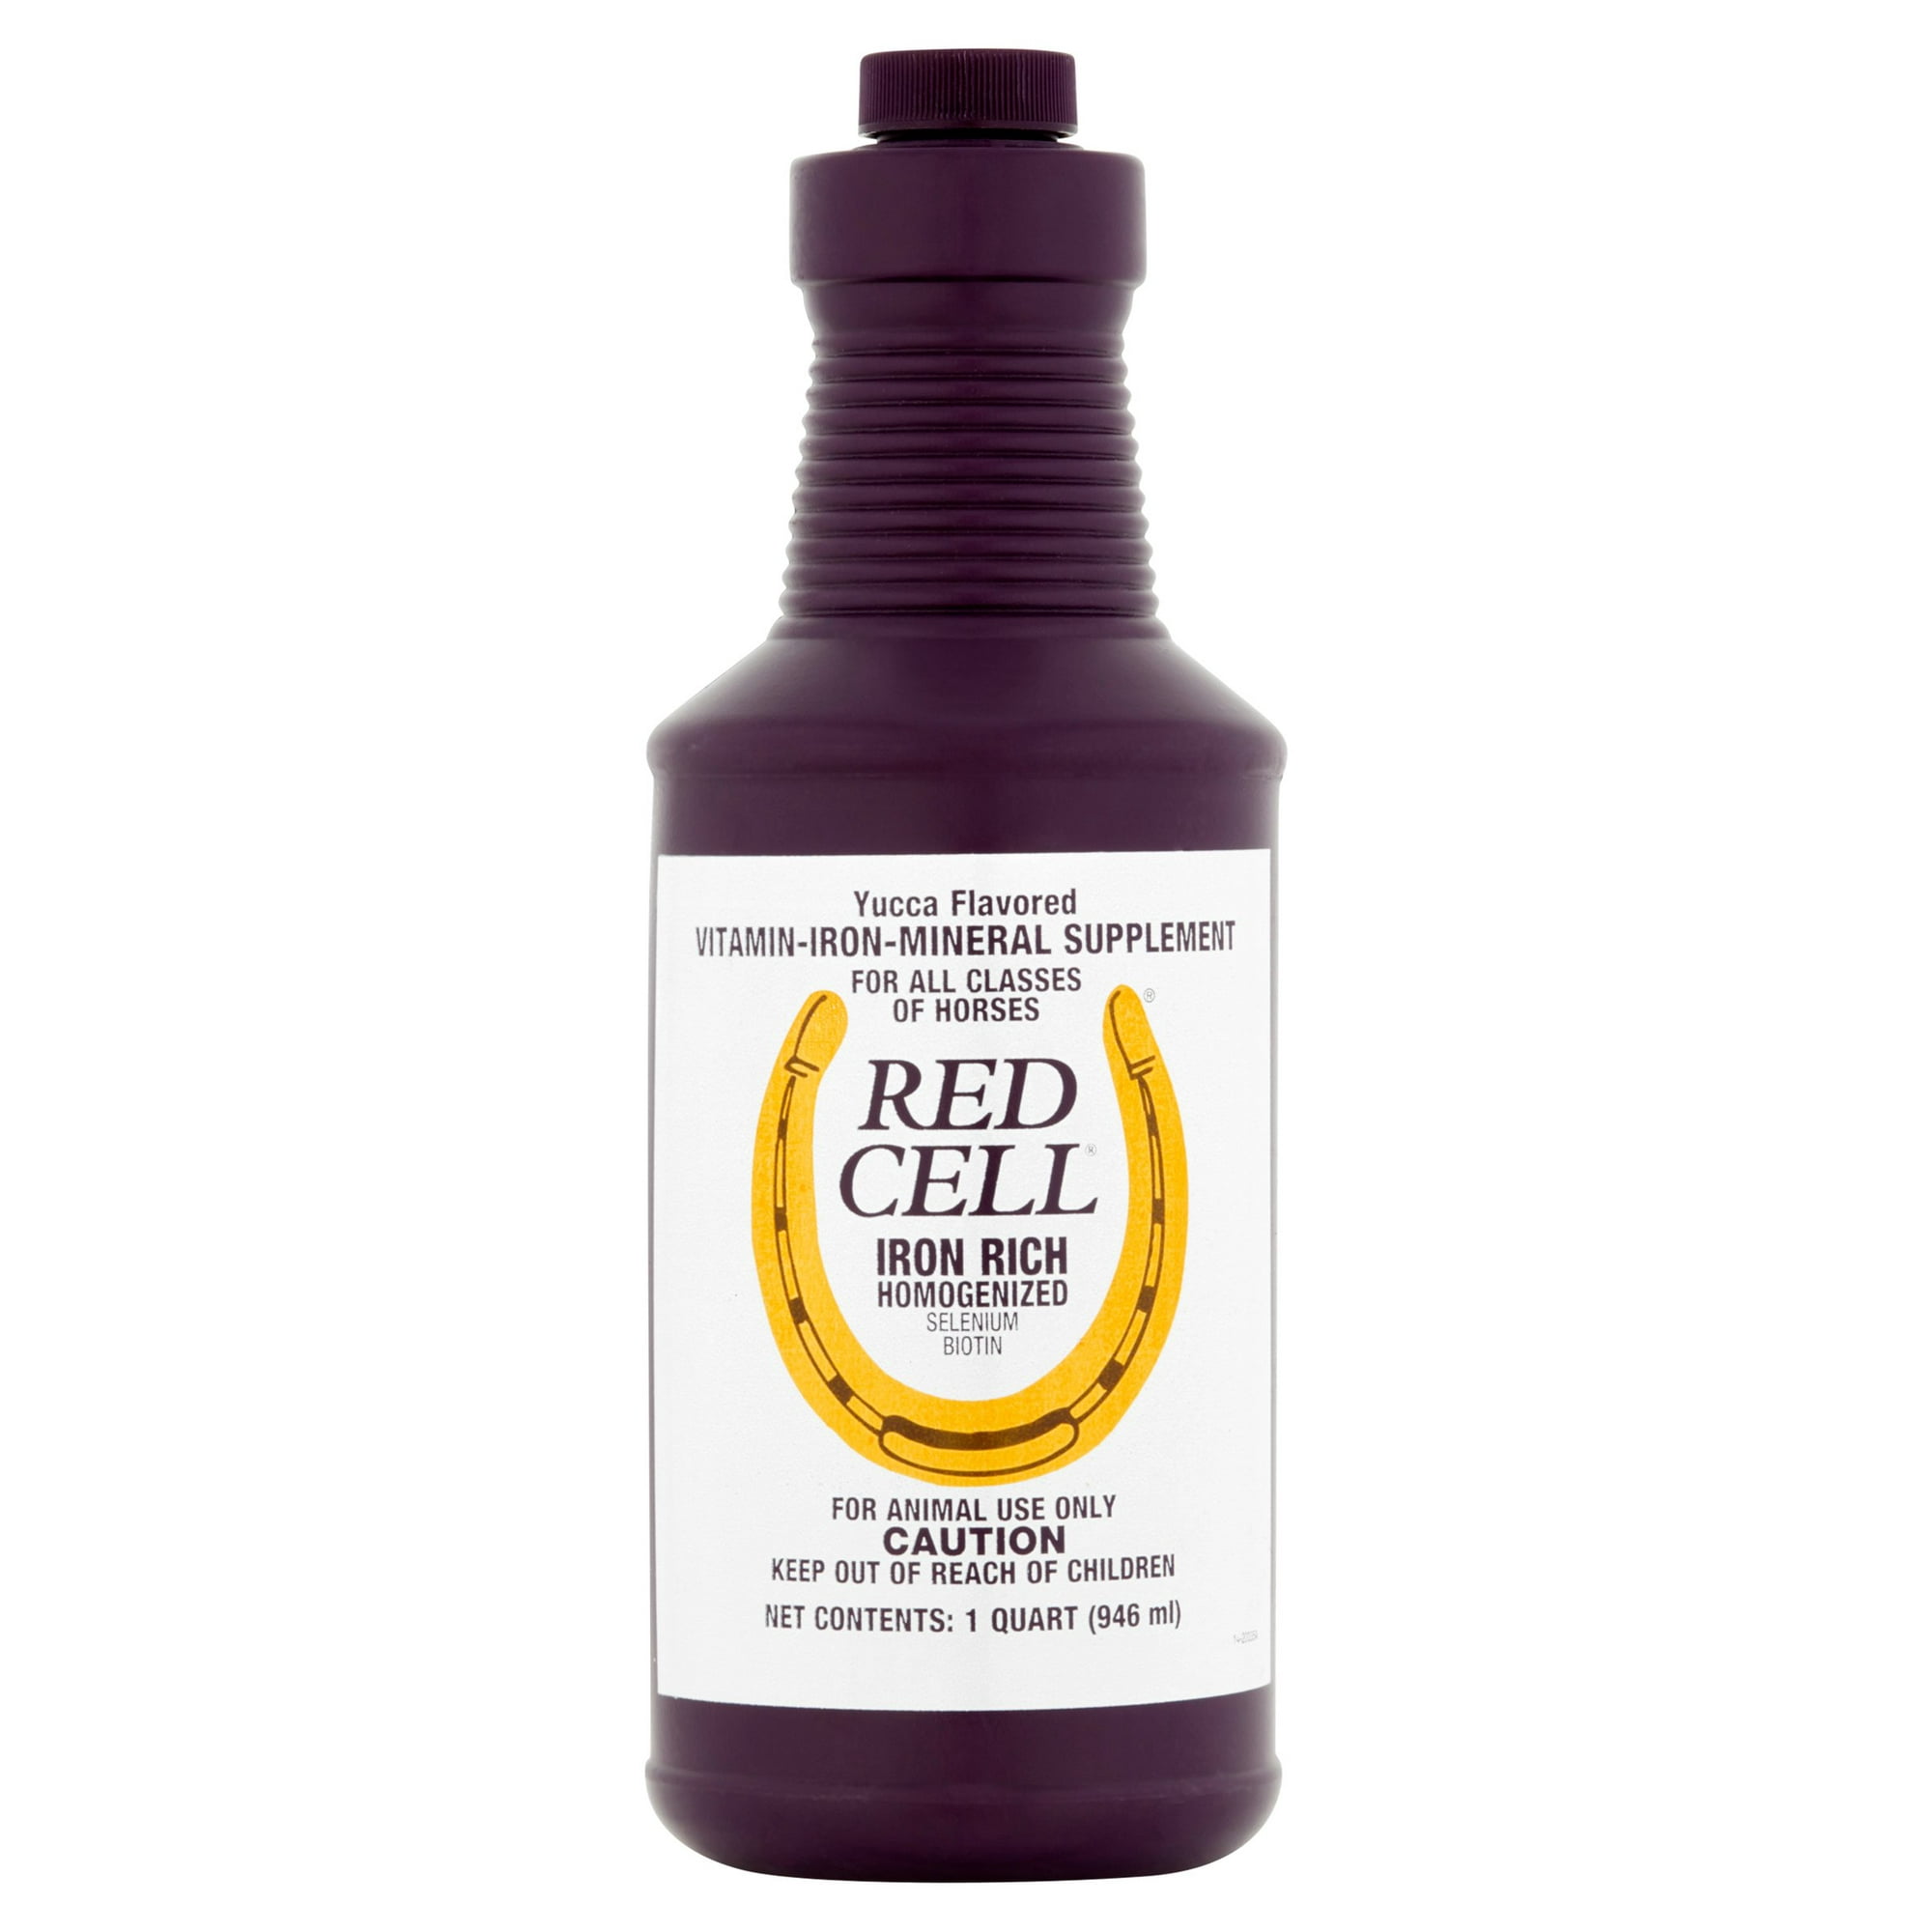 Horse Health Products Red Cell Iron Rich Homogenized Selenium Biotin Horse Supplement, 1 qt.